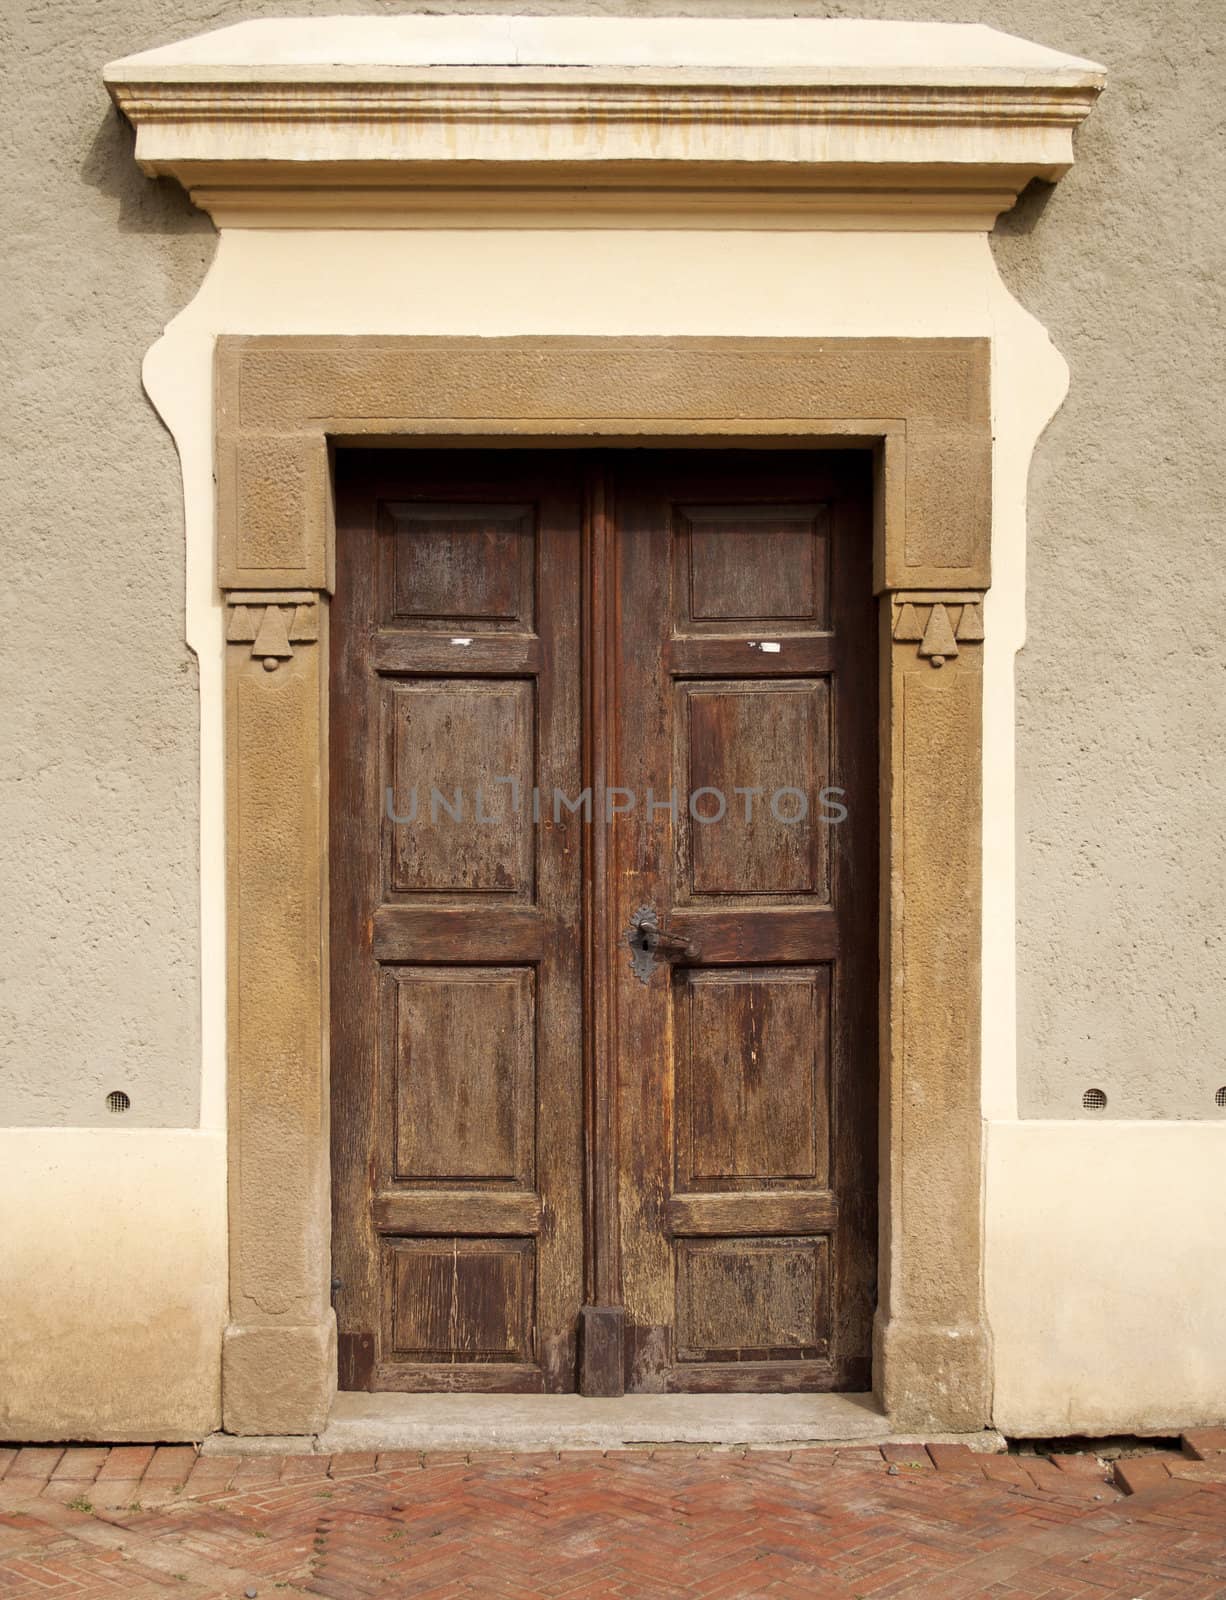 doorwaydoors to houses and churches, entrance. old, new, beautiful